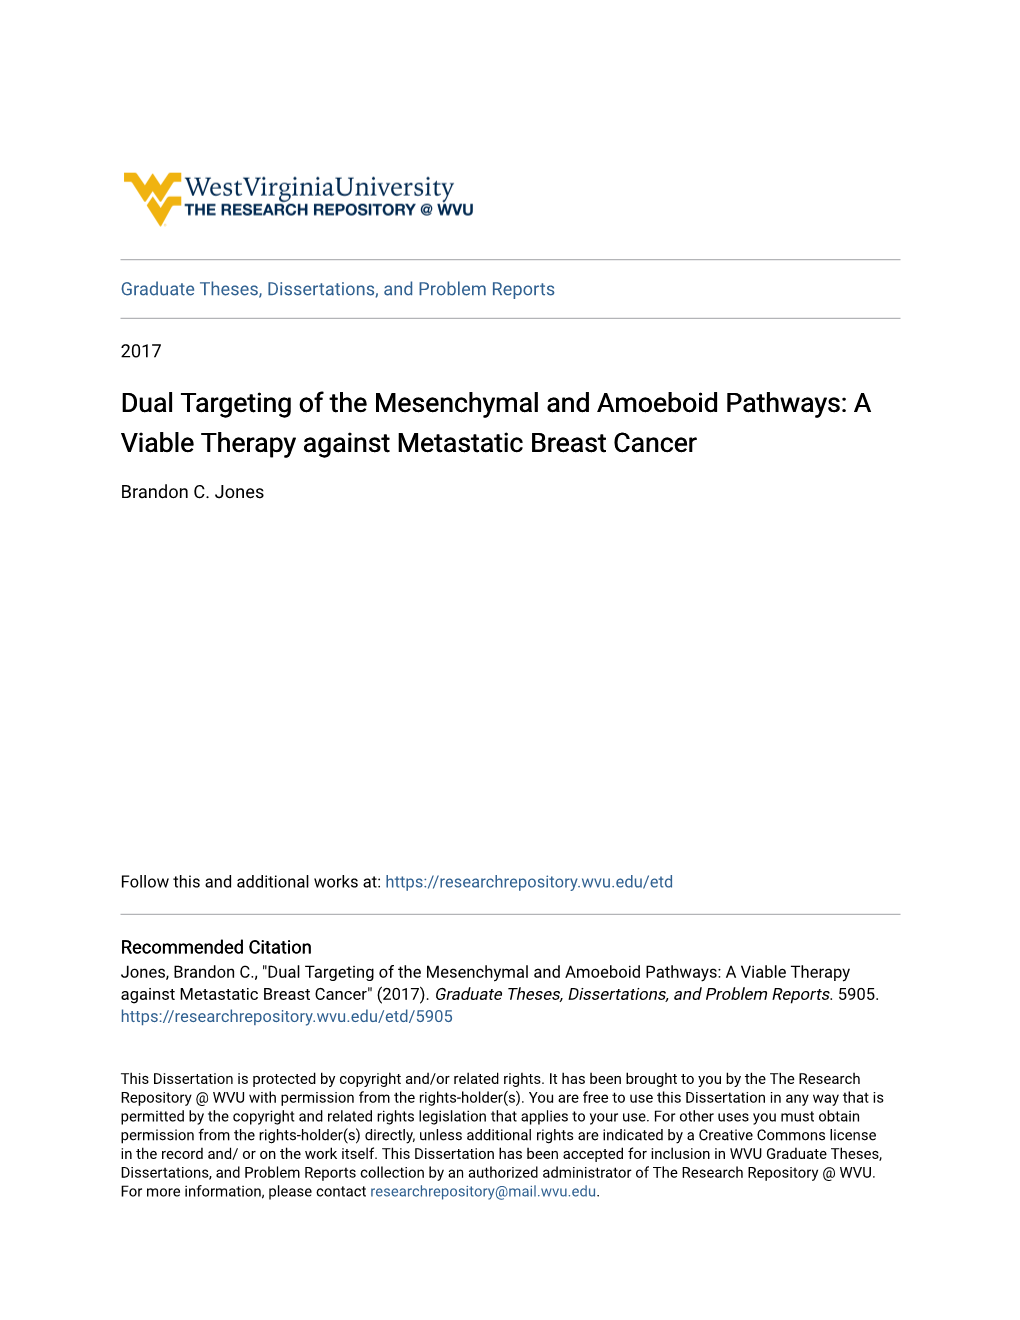 A Viable Therapy Against Metastatic Breast Cancer